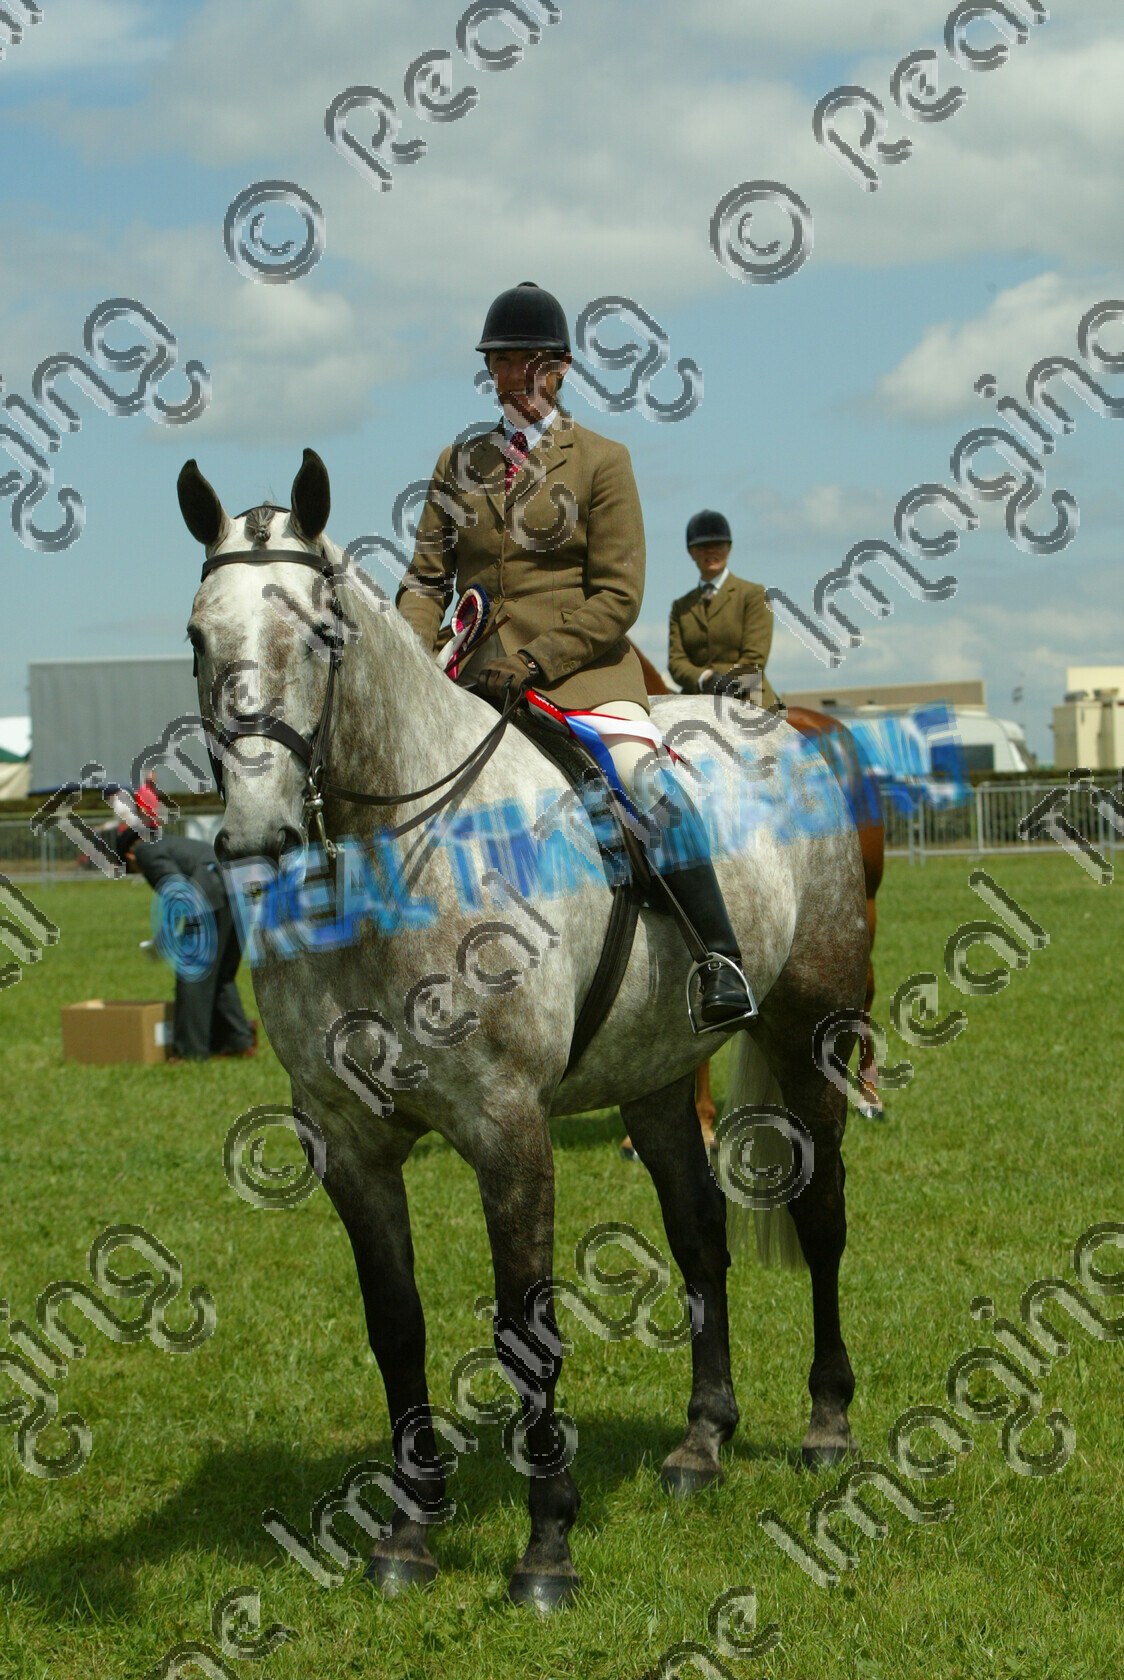 S06-26-T2-001 
 Keywords: Cheshire County Show
Tuesday 20 June 2006
2238 SILVER STREAM
rider Jayne Webber
dappled grey gray
Heavyweight Hunter
horse pony show showing
rosette rosettes prize winner
champion first best
presentation award
standing stood